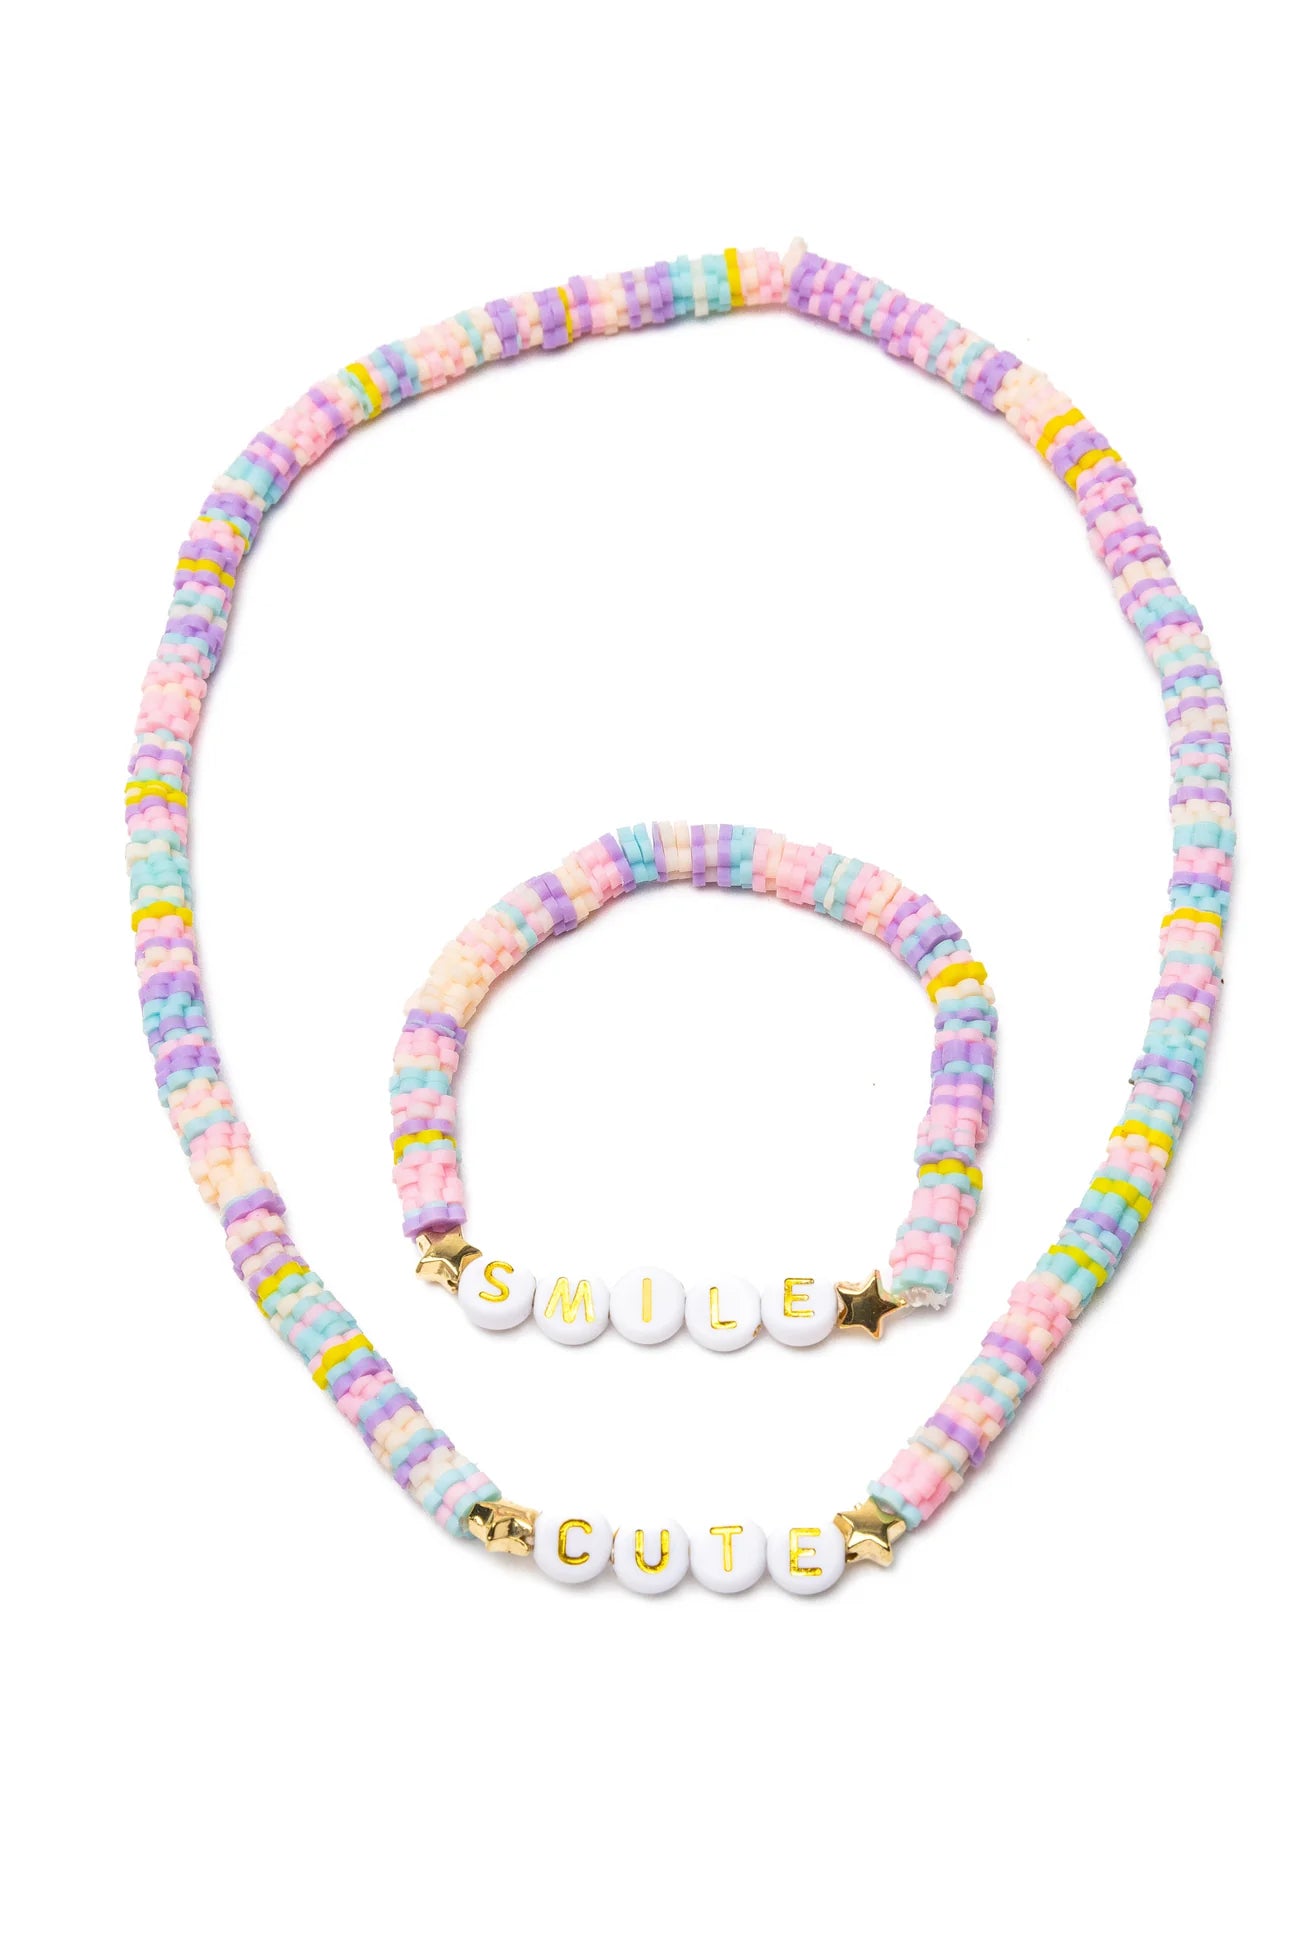 Cute Smile Necklace and Bracelet Set by Great Pretenders # 86157